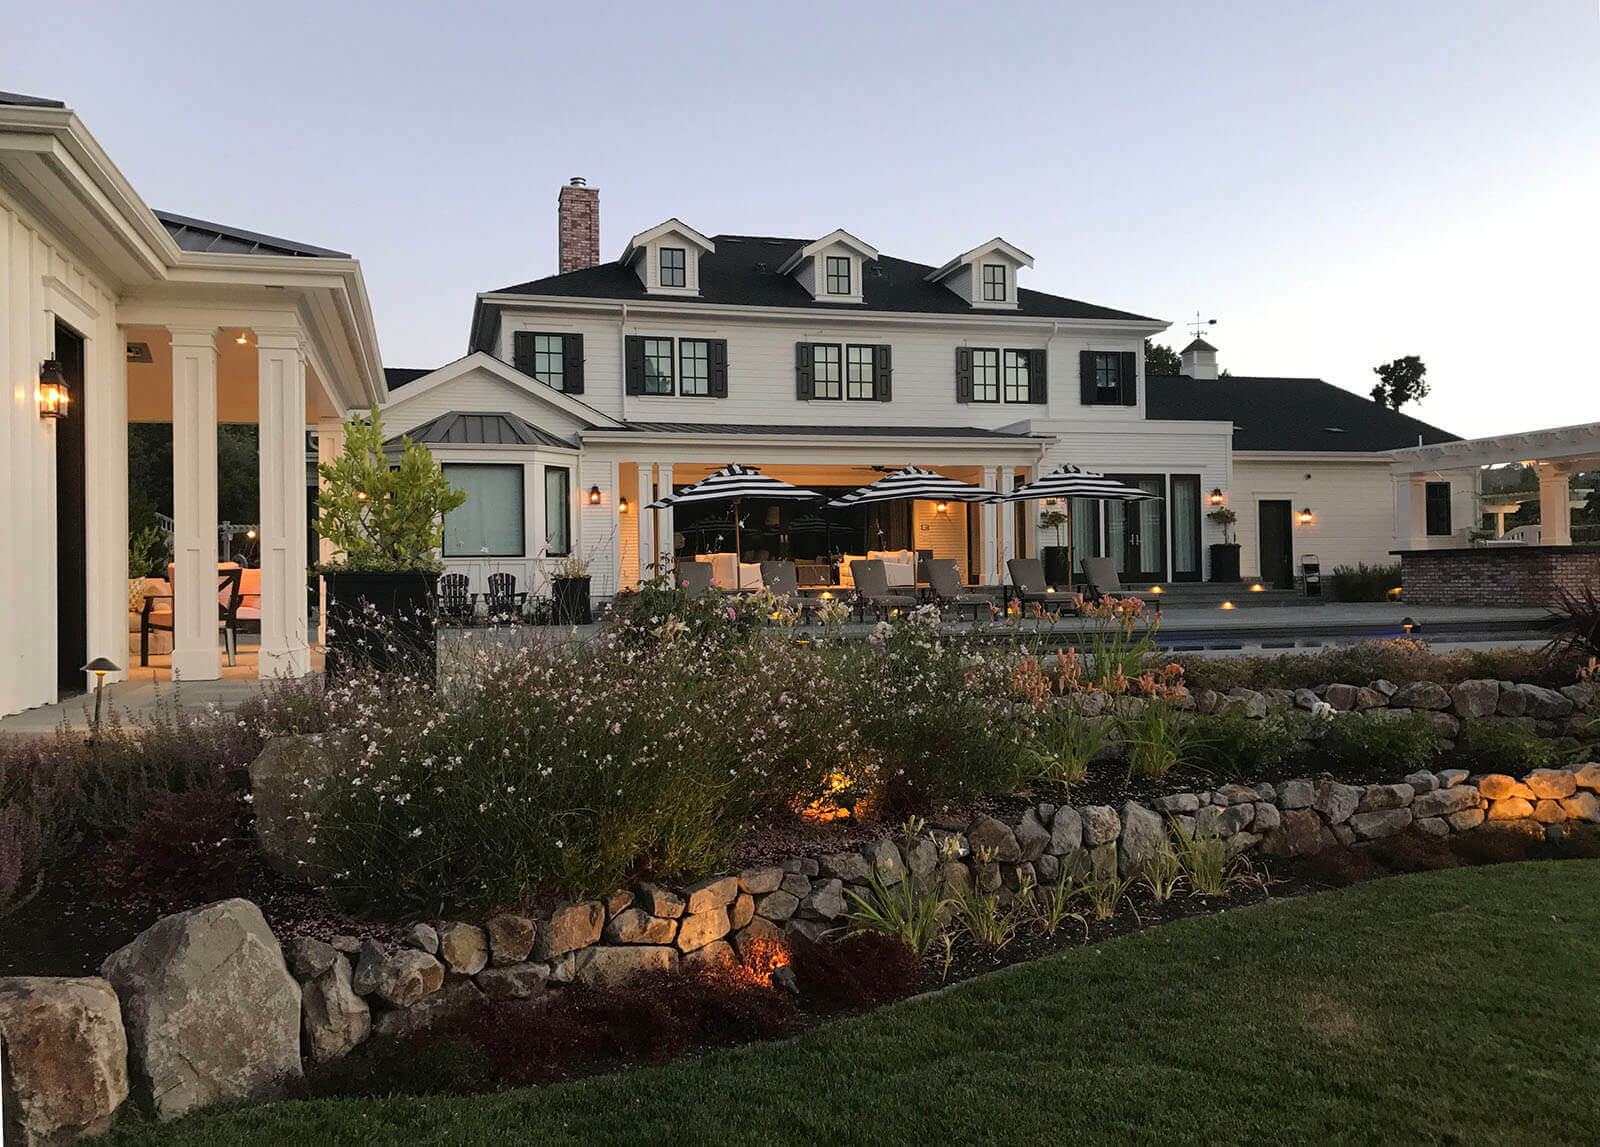 Outdoor lighting at sunset, light fixtures around the edge of the structures, and accent lighting on staged gardening areas